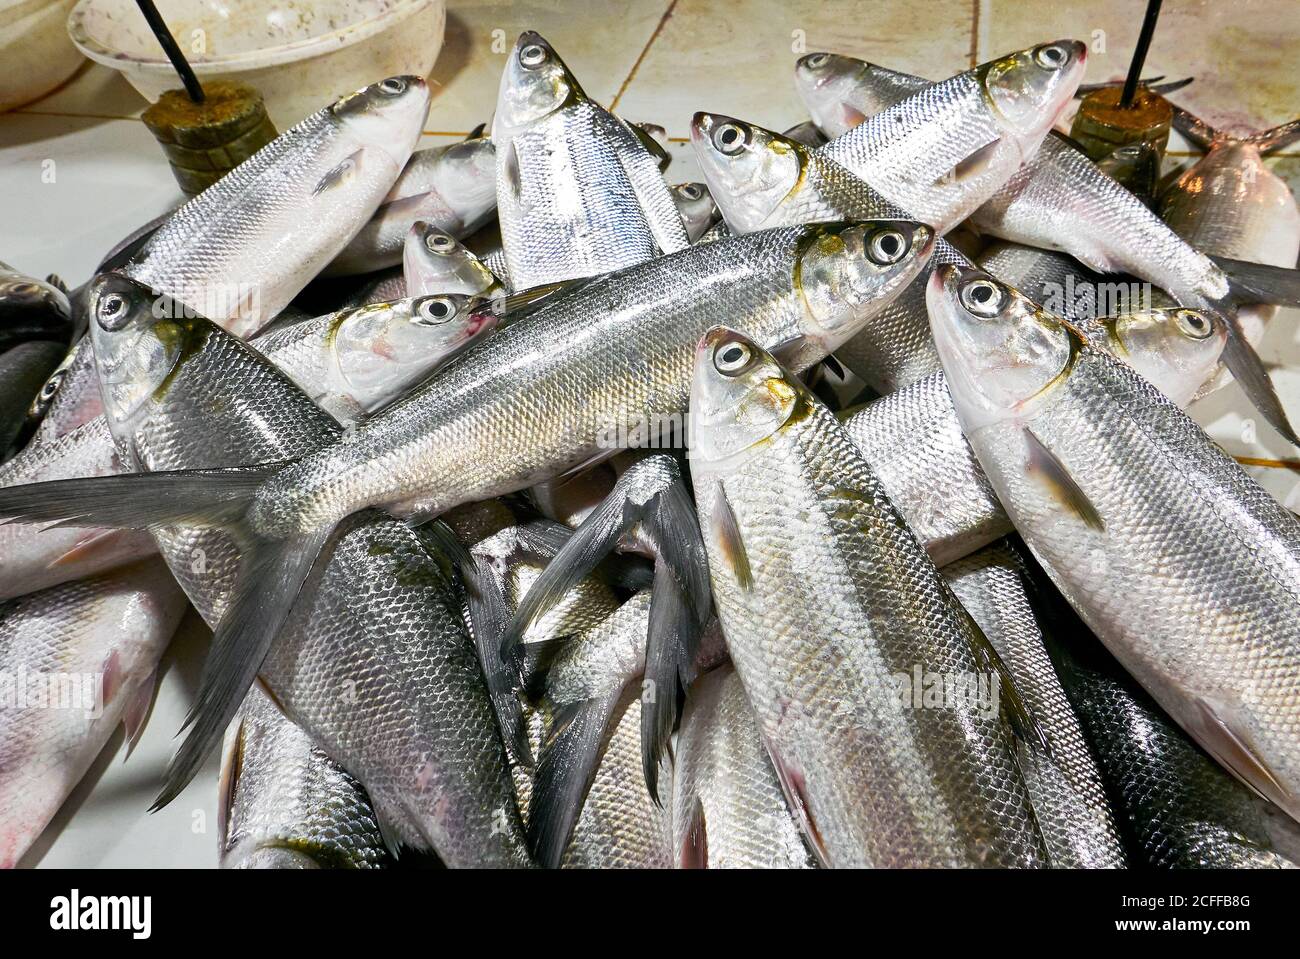 Isolated close-up of a heap of silver colored fresh bangus milk fish for sale at the Central Market in Iloilo City, Philippines Stock Photo